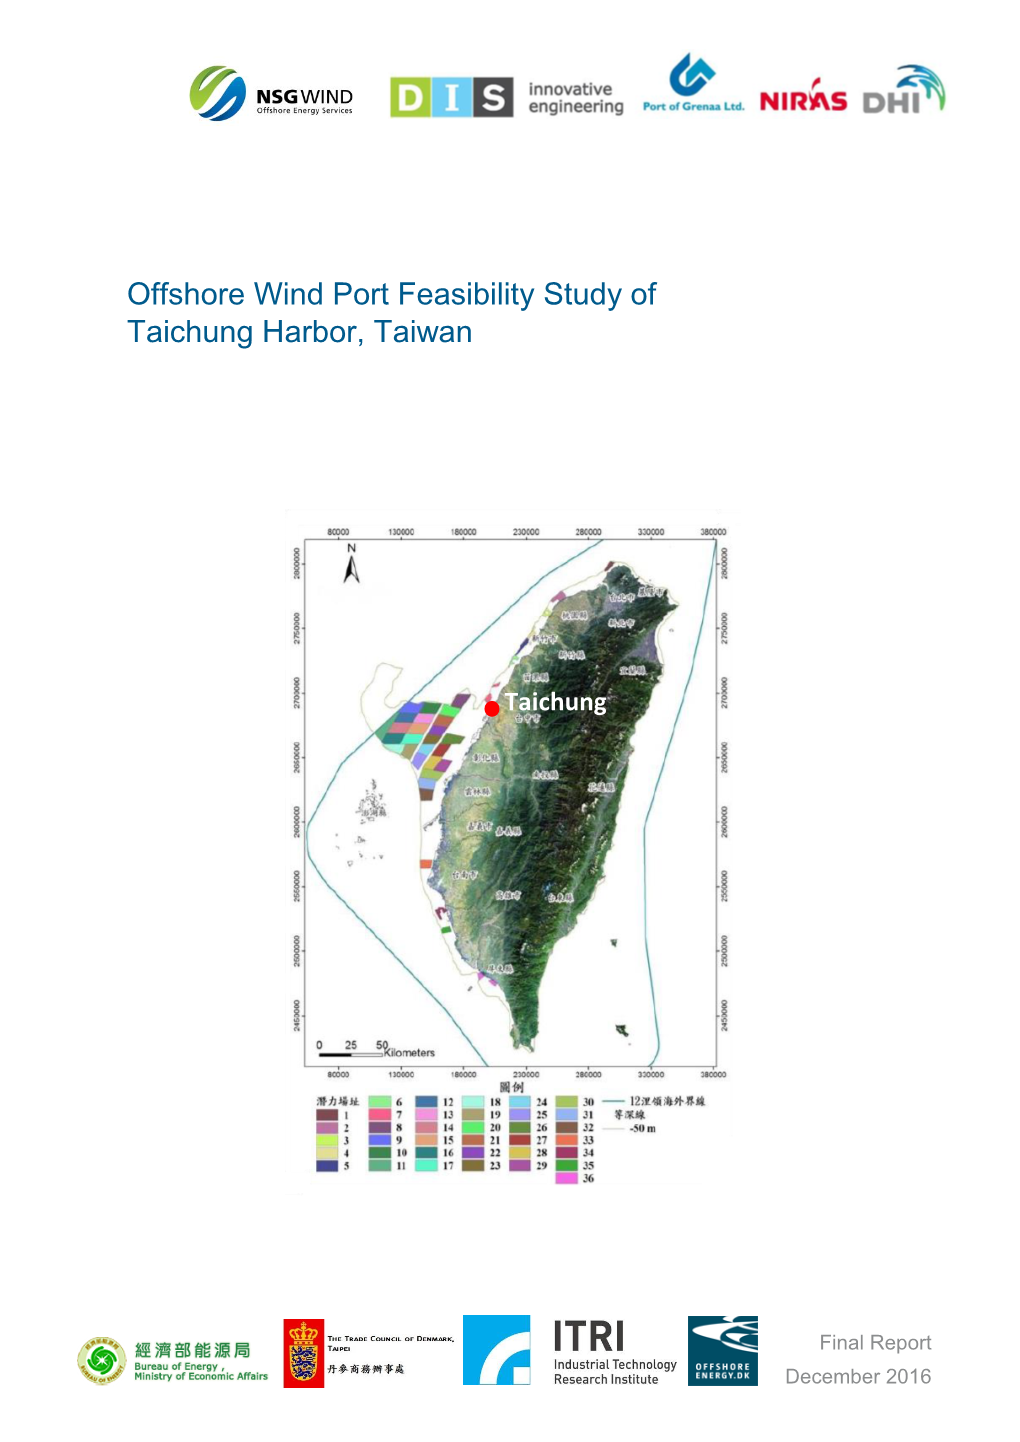 Offshore Wind Port Feasibility Study of Taichung Harbor, Taiwan